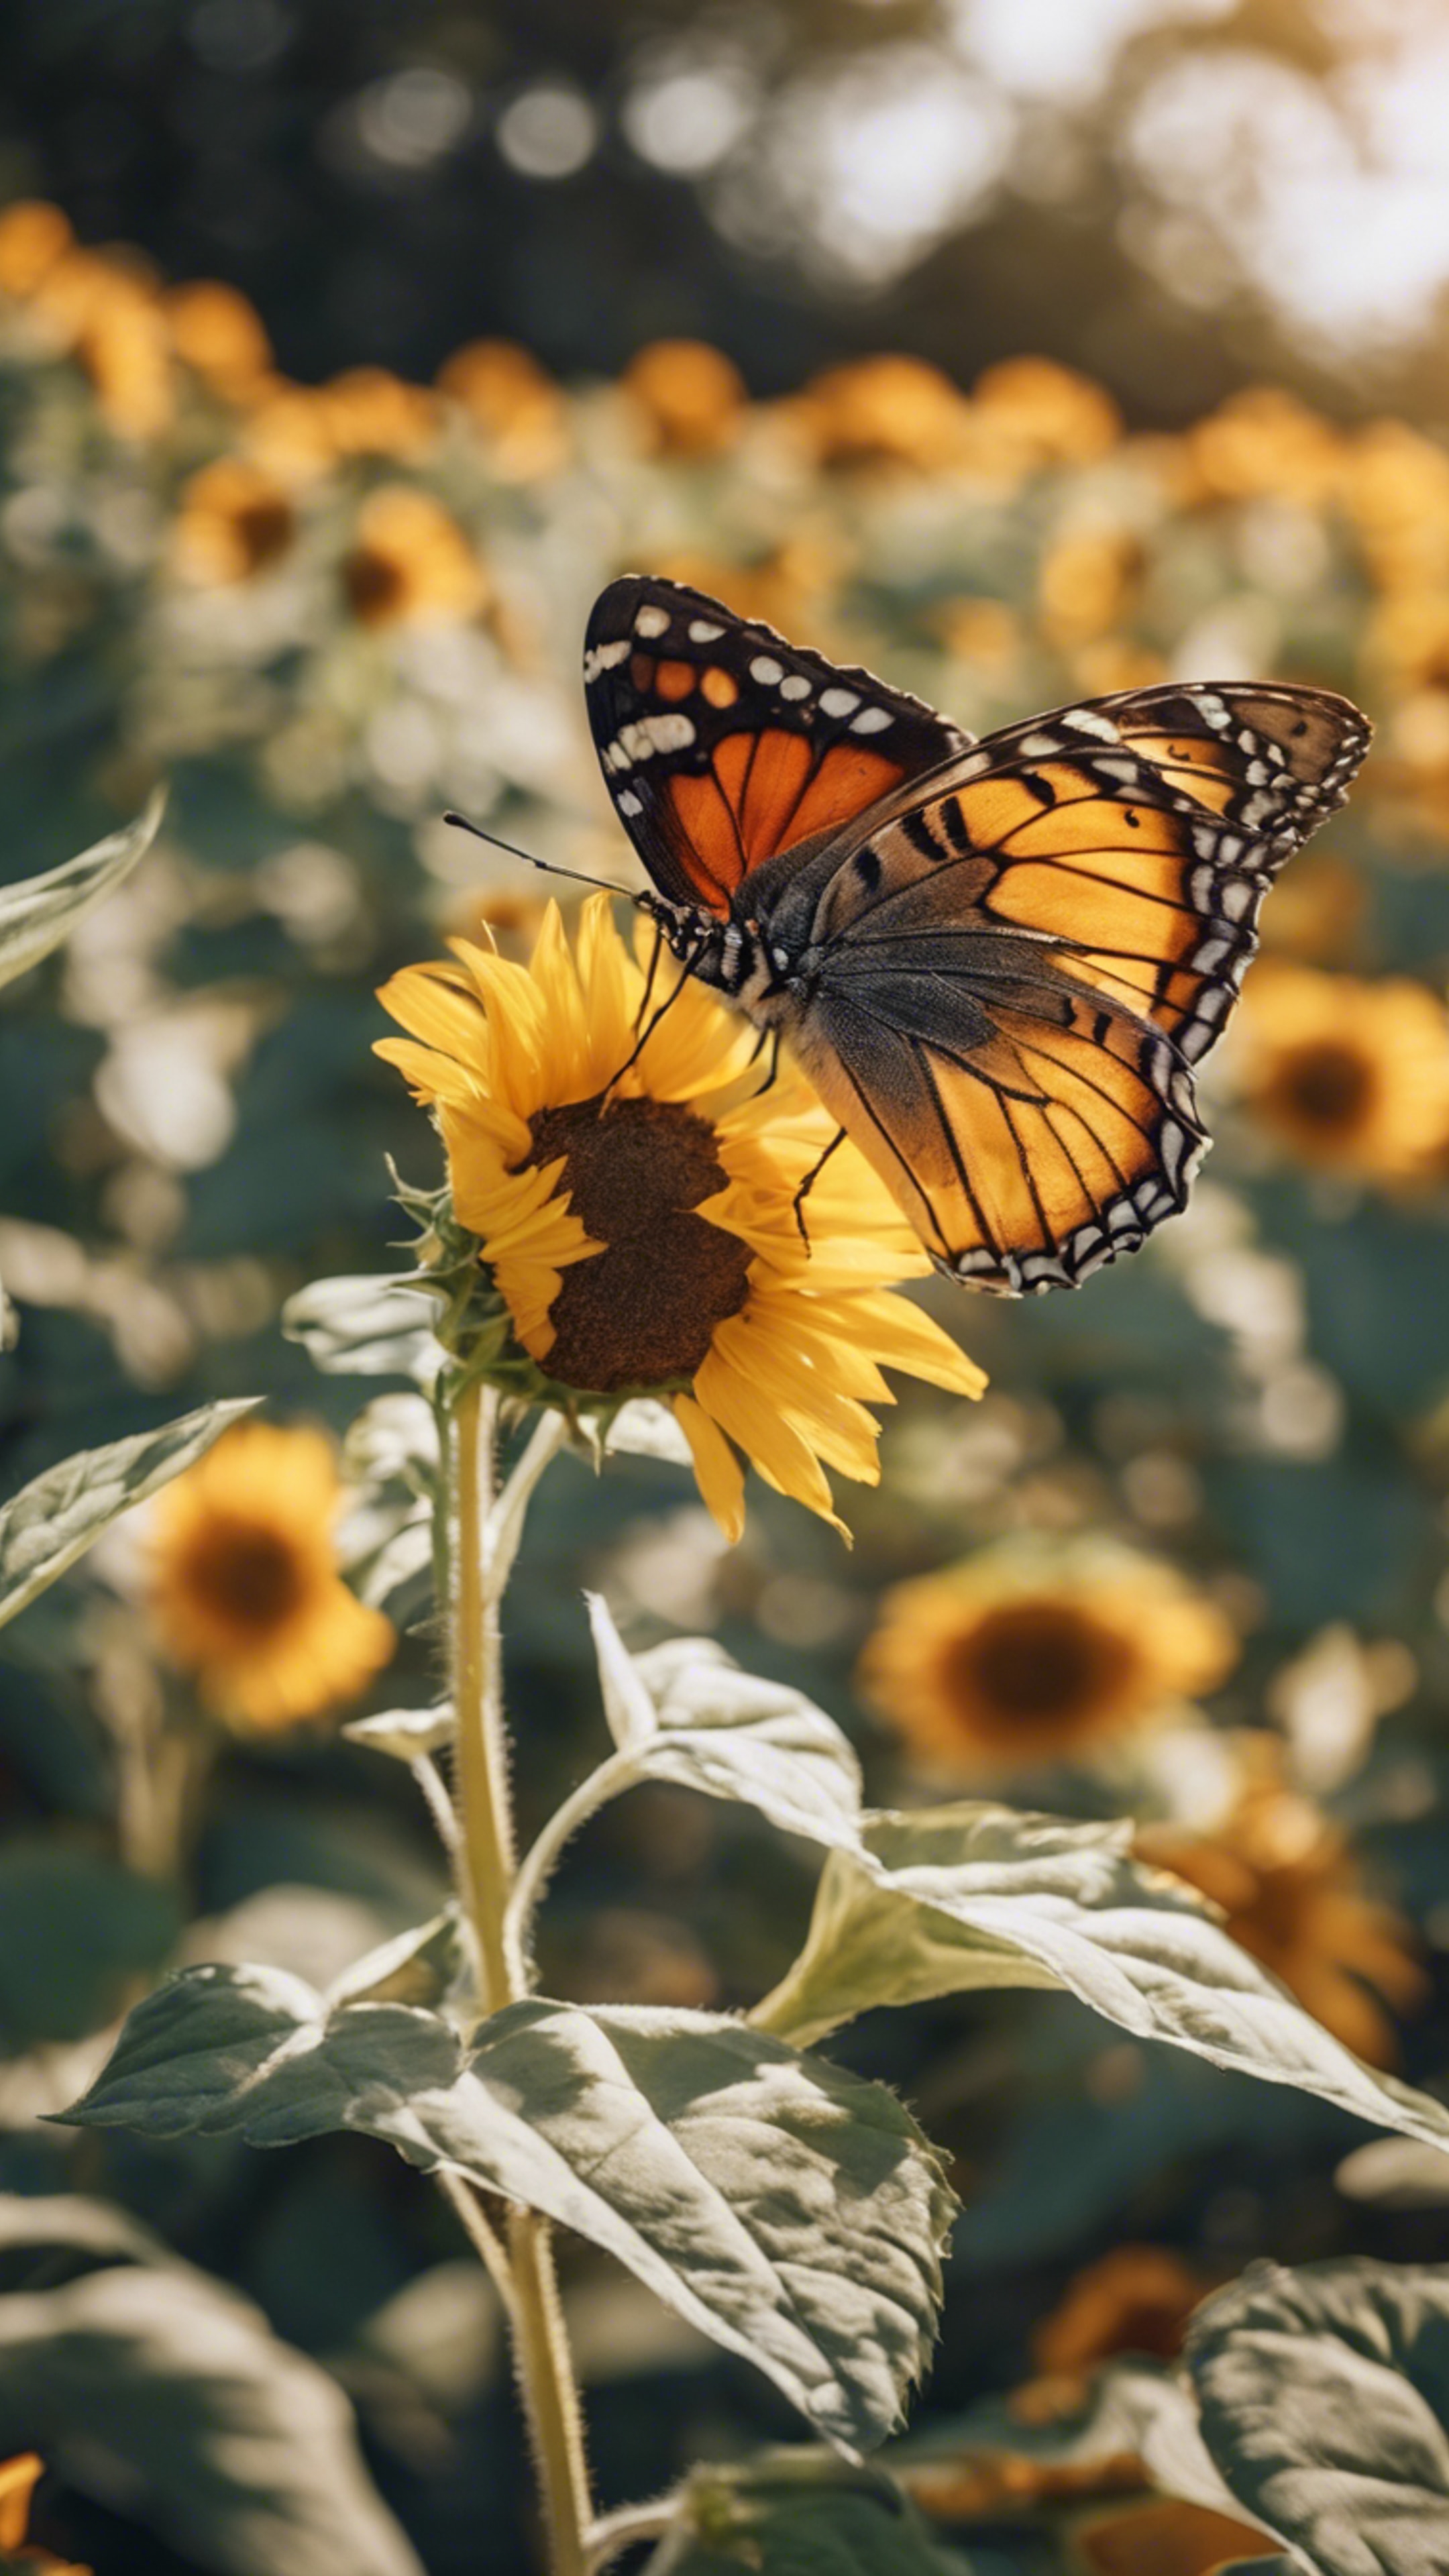 A vibrant butterfly resting on a sunflower in a bustling garden on a spring morning. Wallpaper[6c43cb3dbdfe44139401]